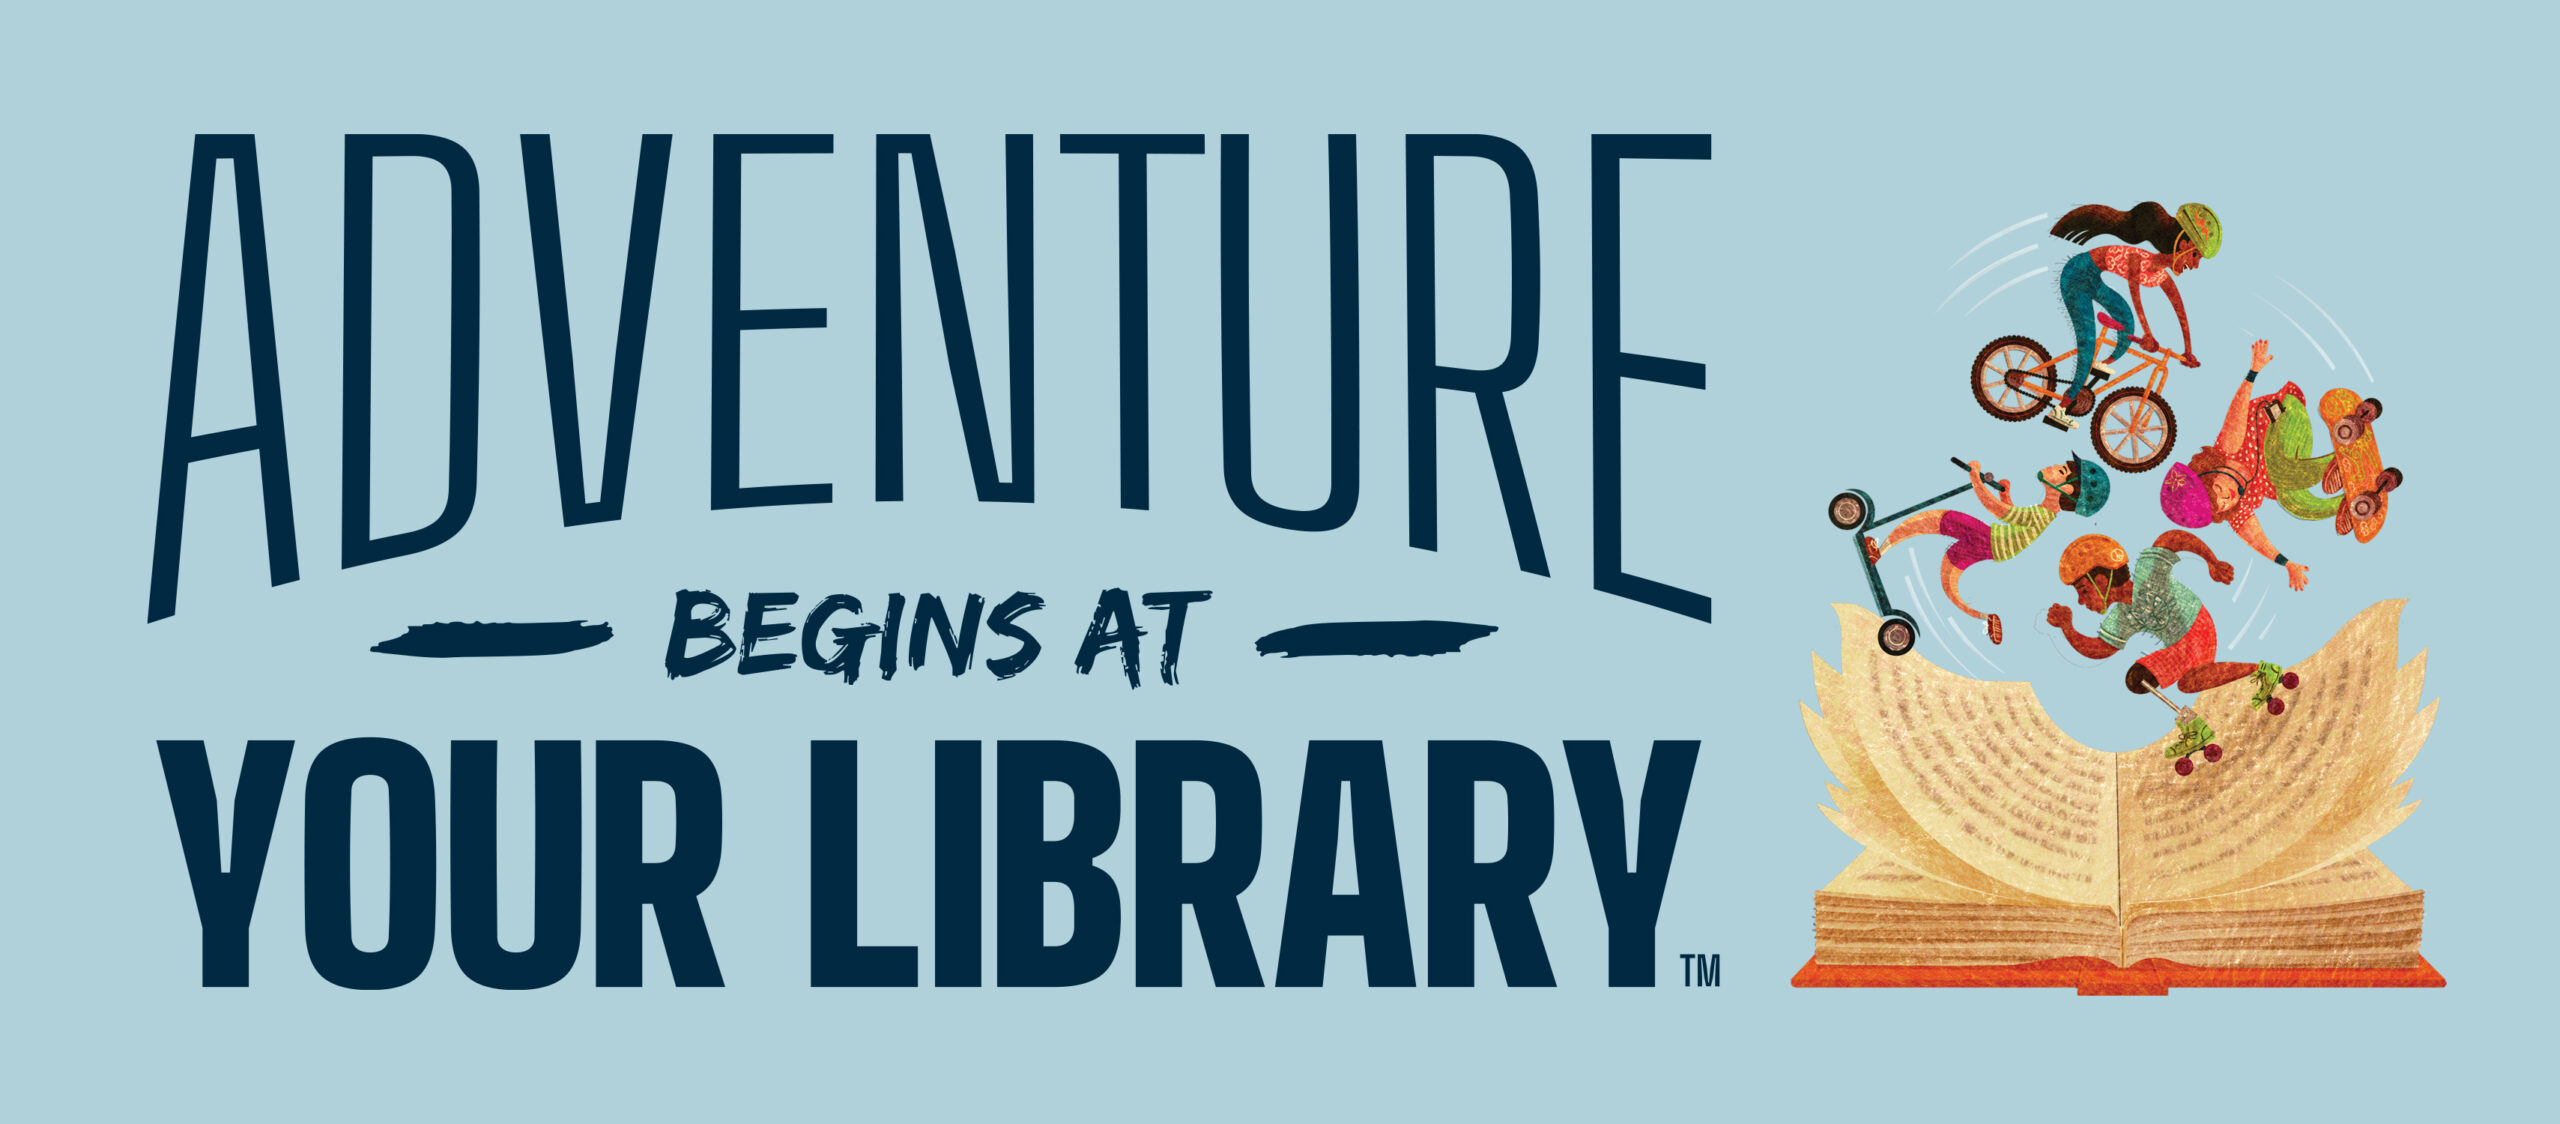 Adventure Begins at your Library with kids on bikes on a book